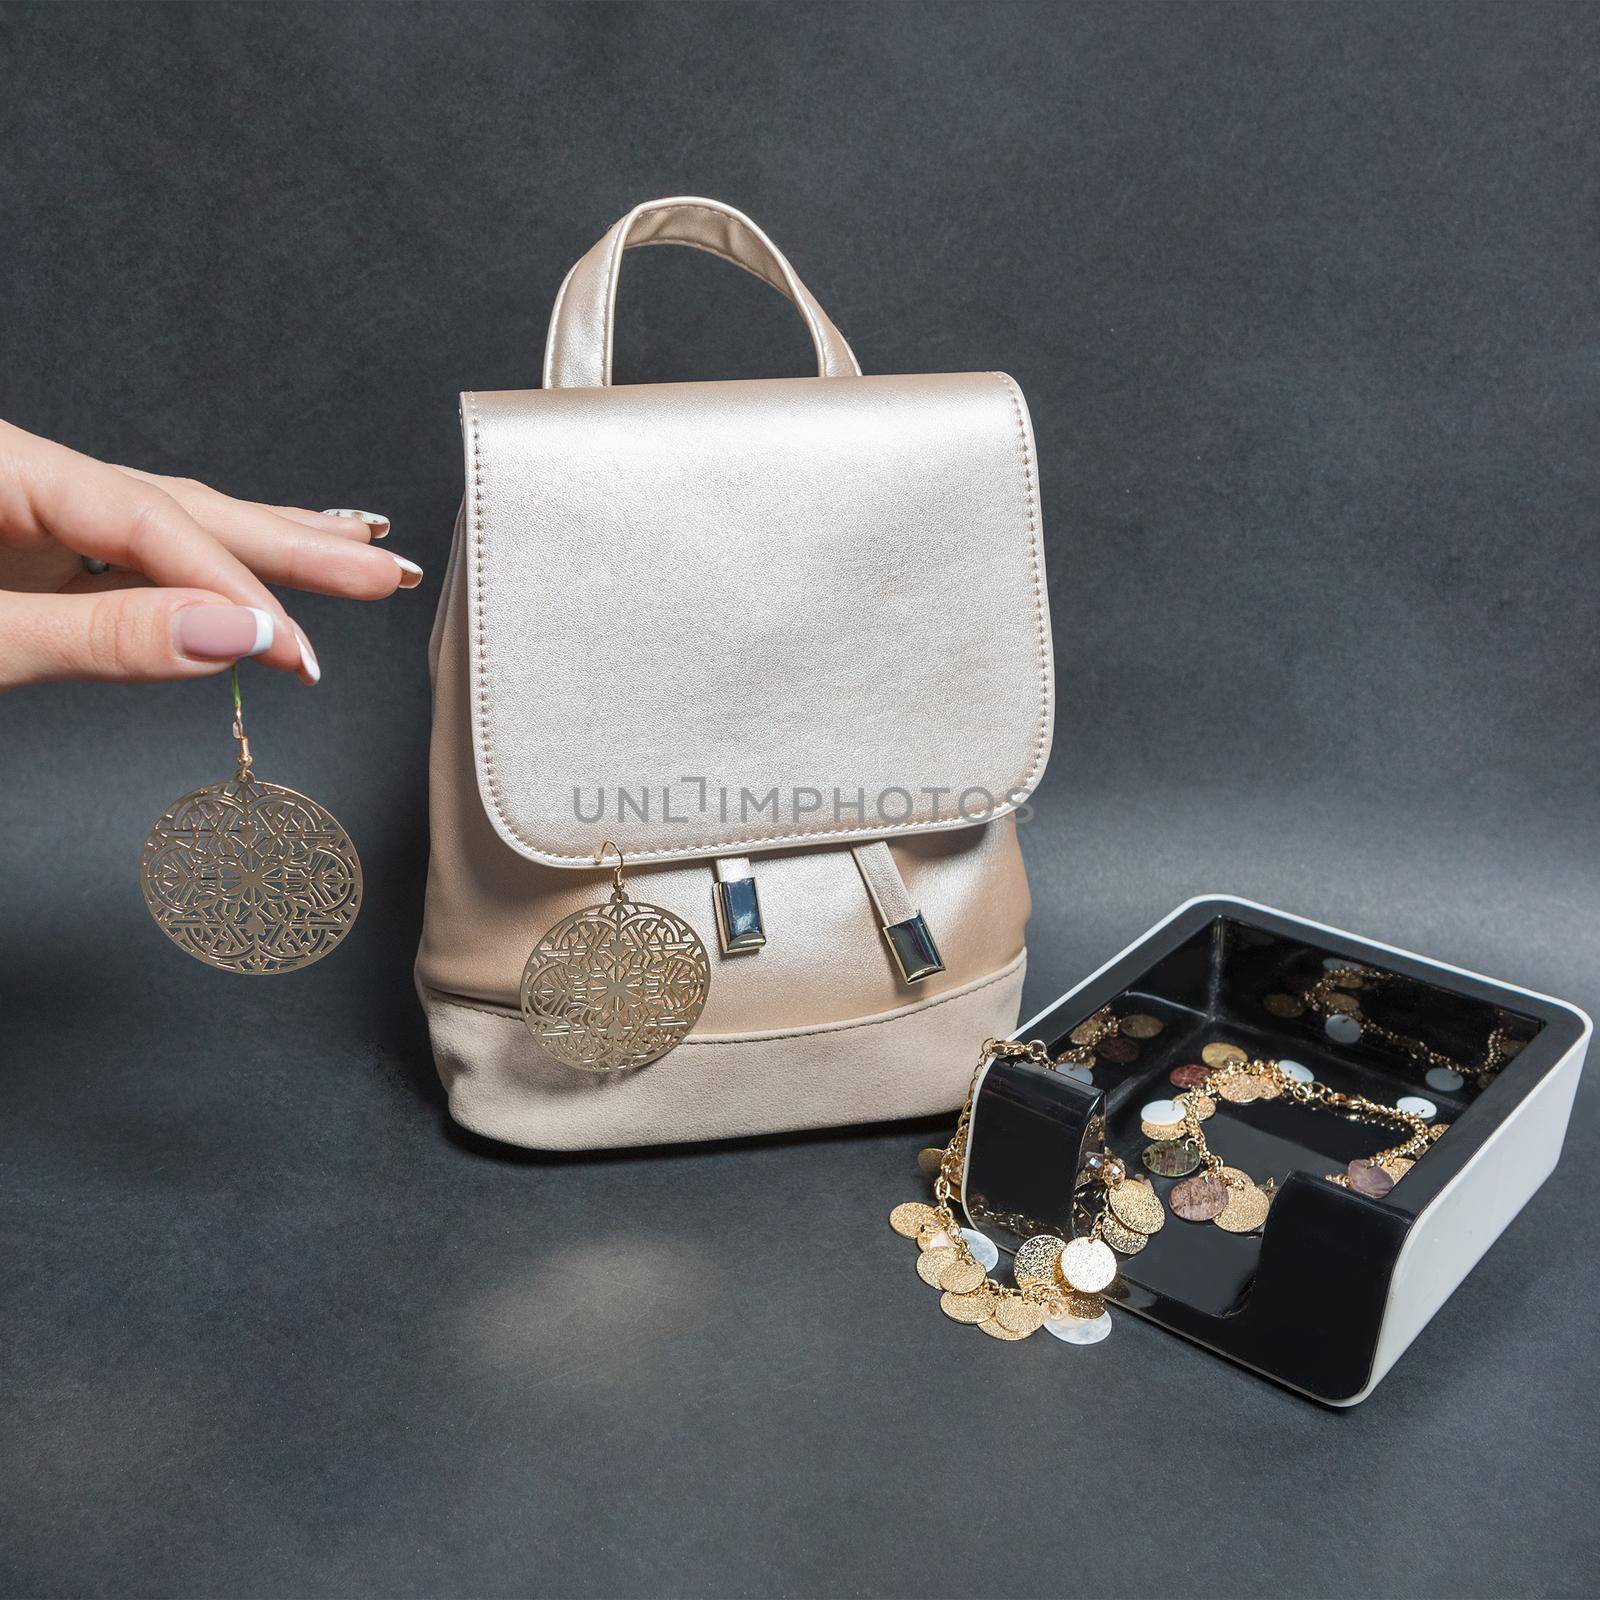 Holding a jewelry earrings with a woman bag isolated